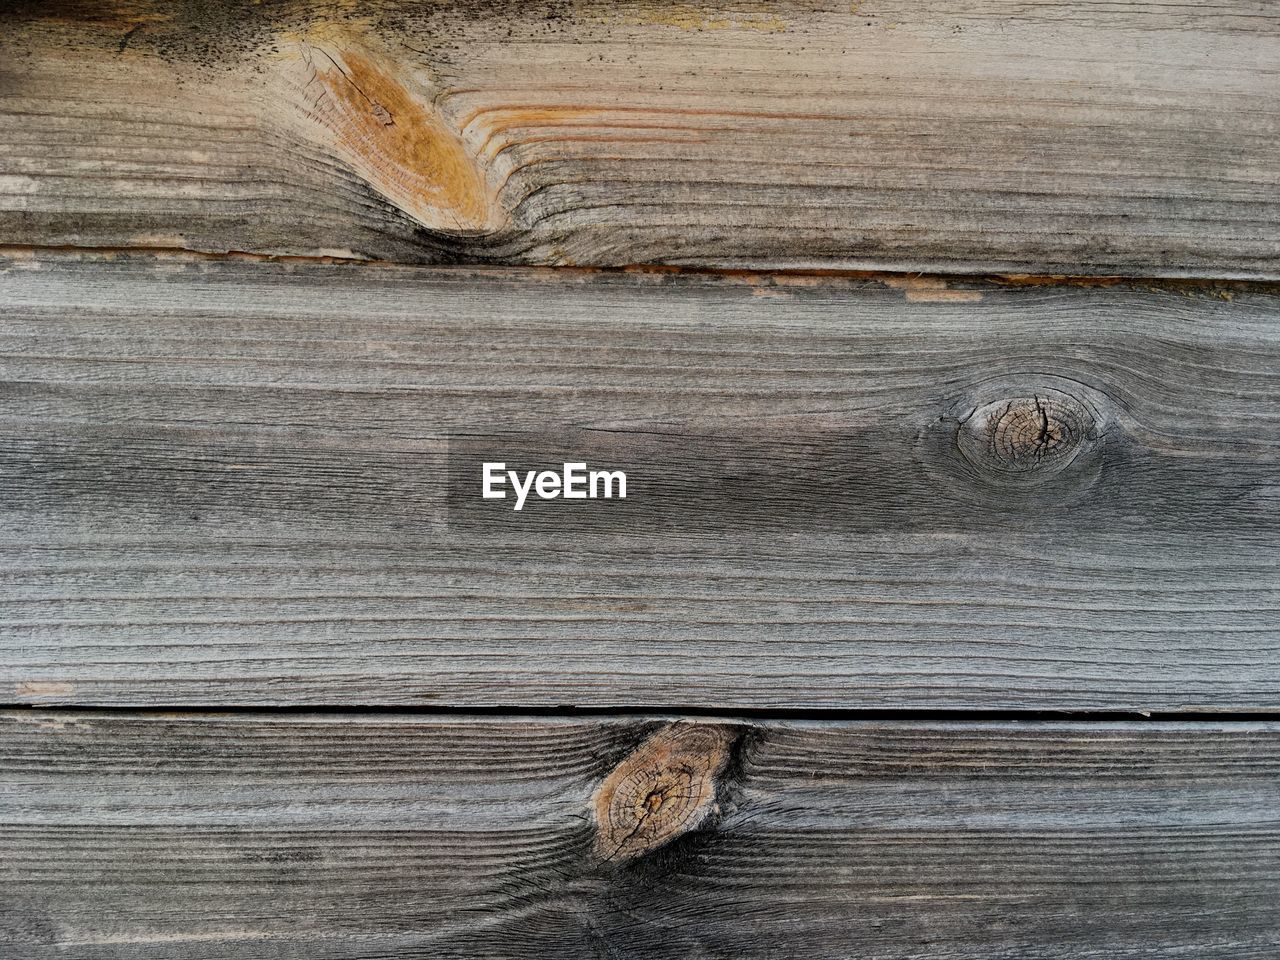 FULL FRAME SHOT OF WEATHERED WOOD WITH TEXTURED BACKGROUND